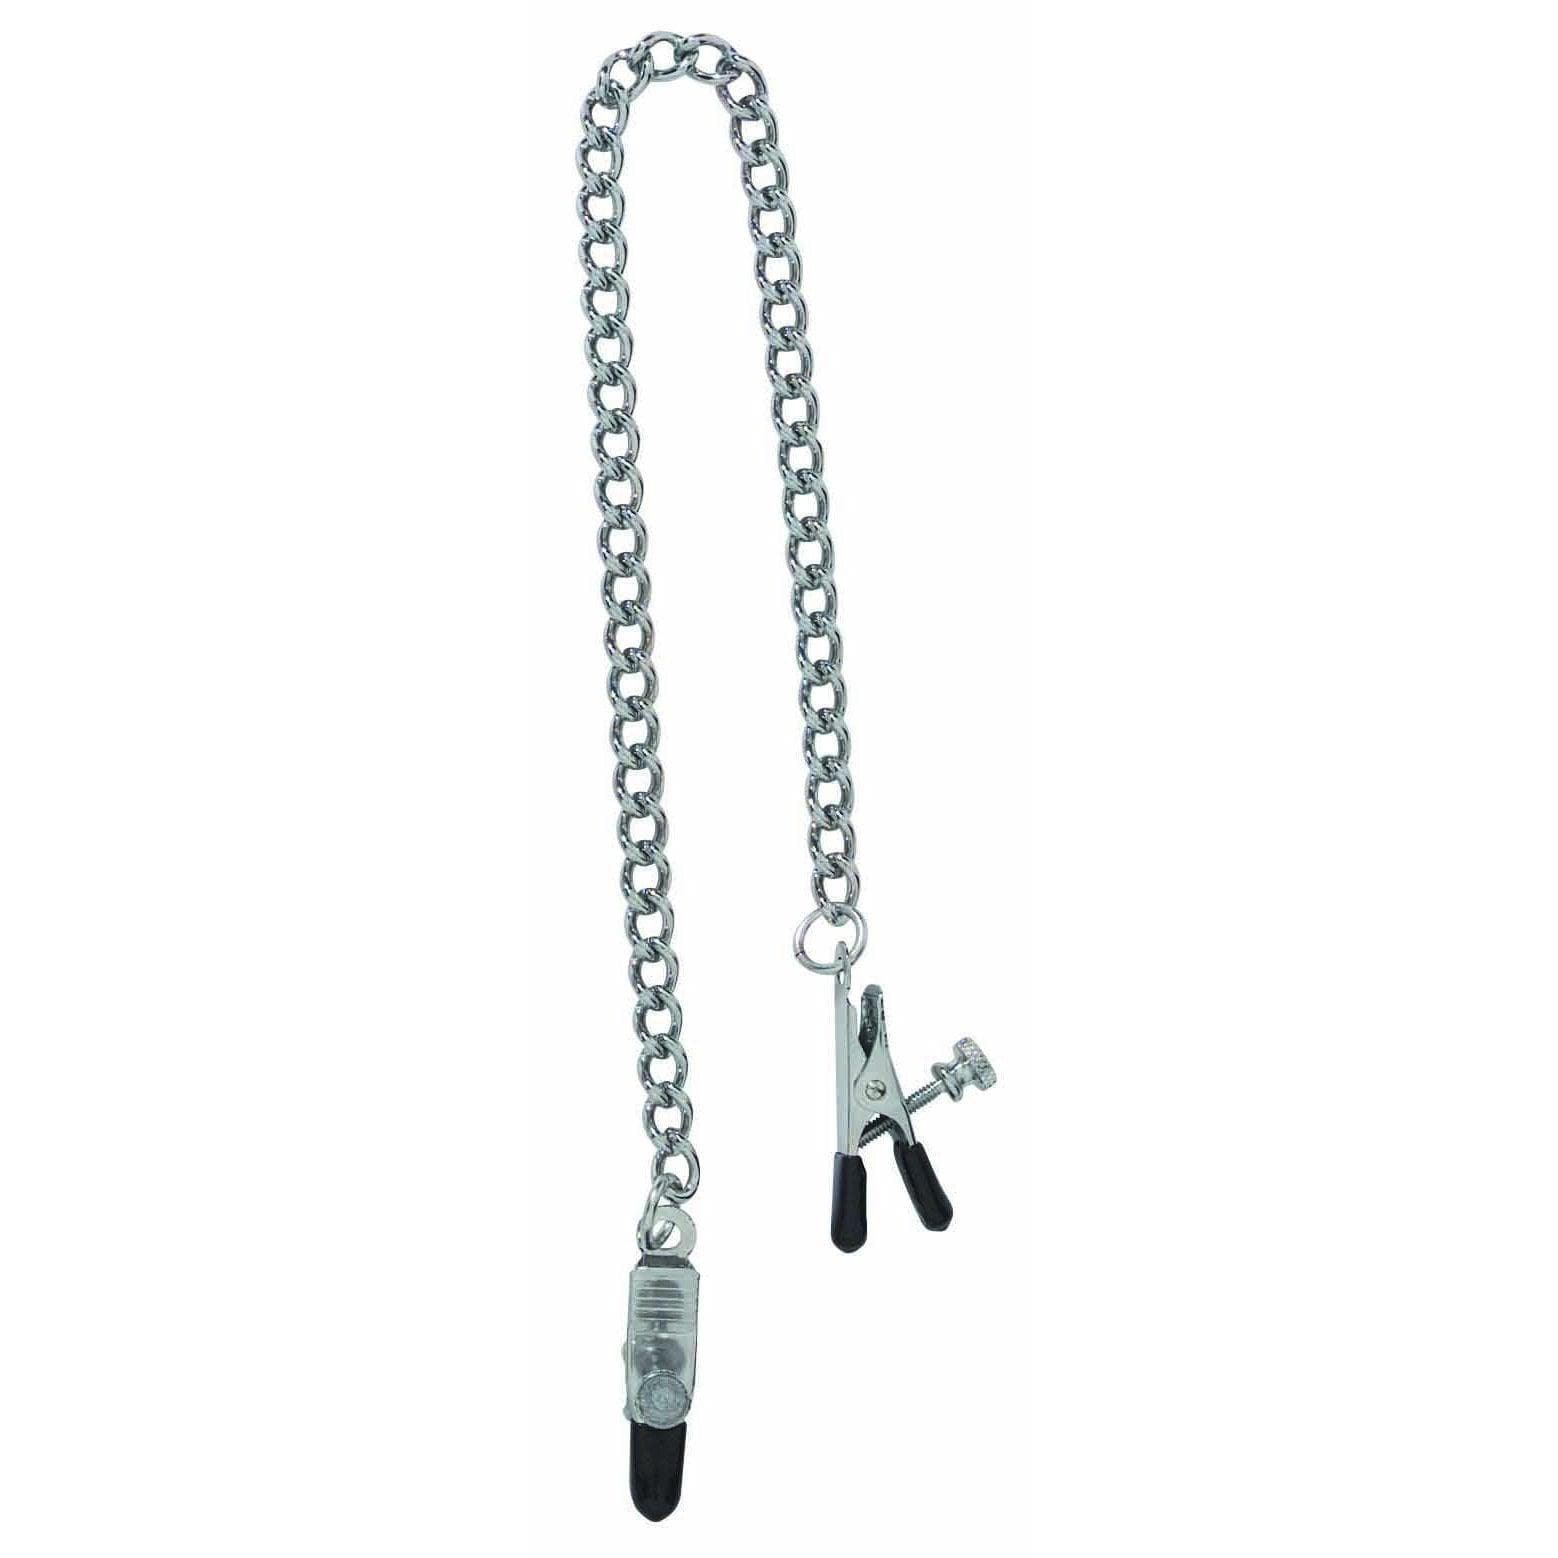 Adjustable Tapered Tip Narrow Jaw Nipple Clamps With Link Chain - Romantic Blessings